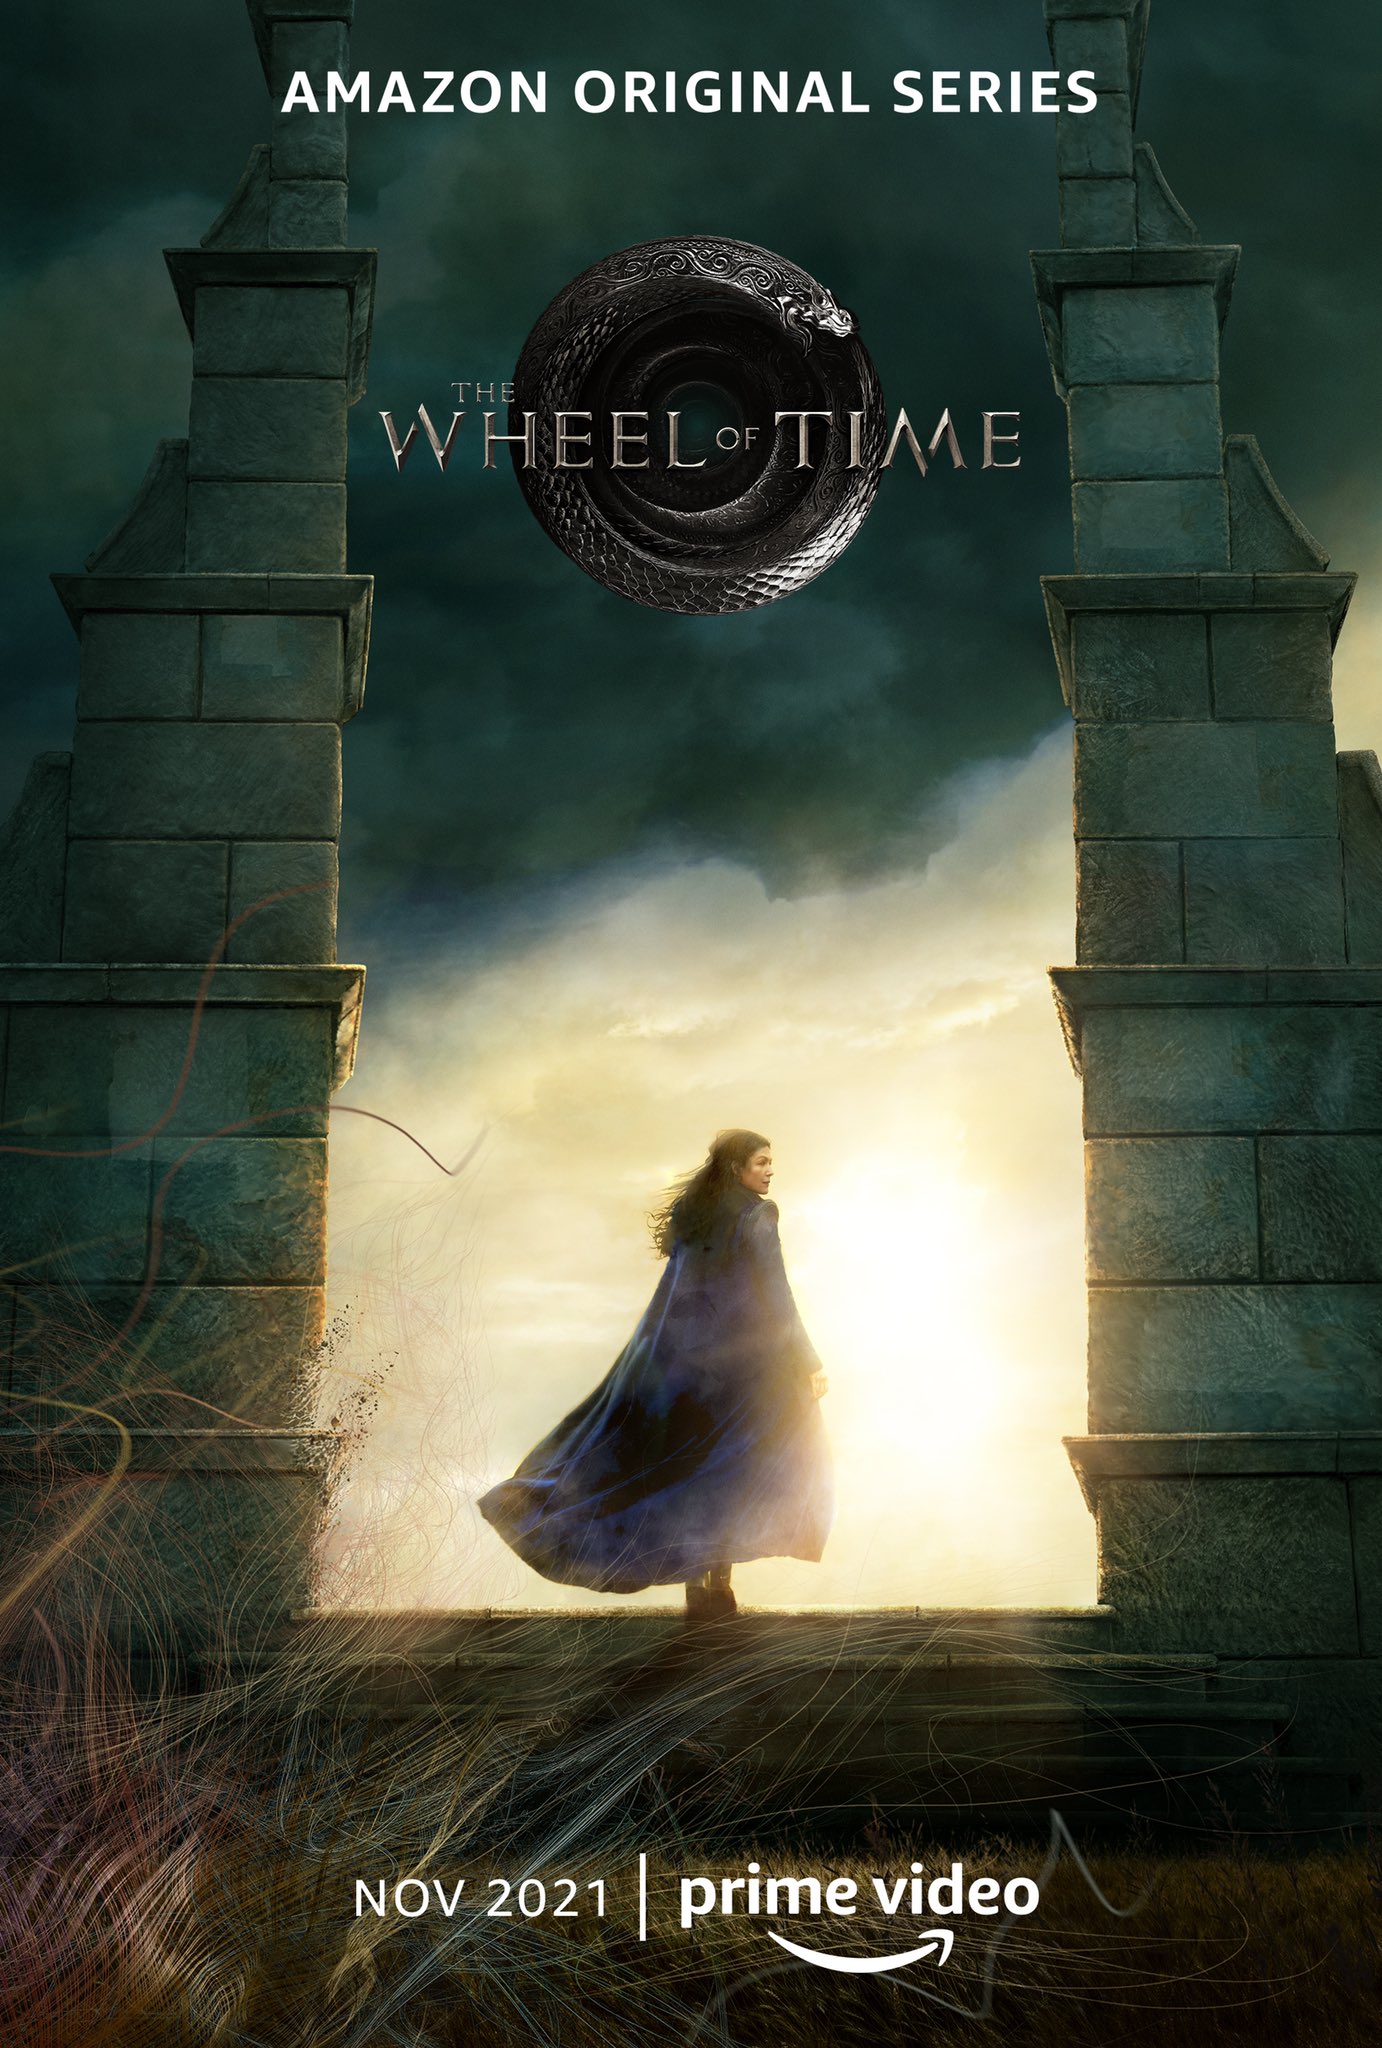 The poster depicts an iconic moment from The Eye of the World. Moiraine, standing beneath slowly moving clouds and wrapped in a blue cloak that is blowing in the wind with its hood down, looks over her shoulder at the audience as she steps through a Waygate into the unknown. She is inviting us to go on a journey with her. The words "Amazon Prime Original" and "Nov 2021" are overlaid on the image along with the Wheel of Time serpent logo and the Prime Video smile.